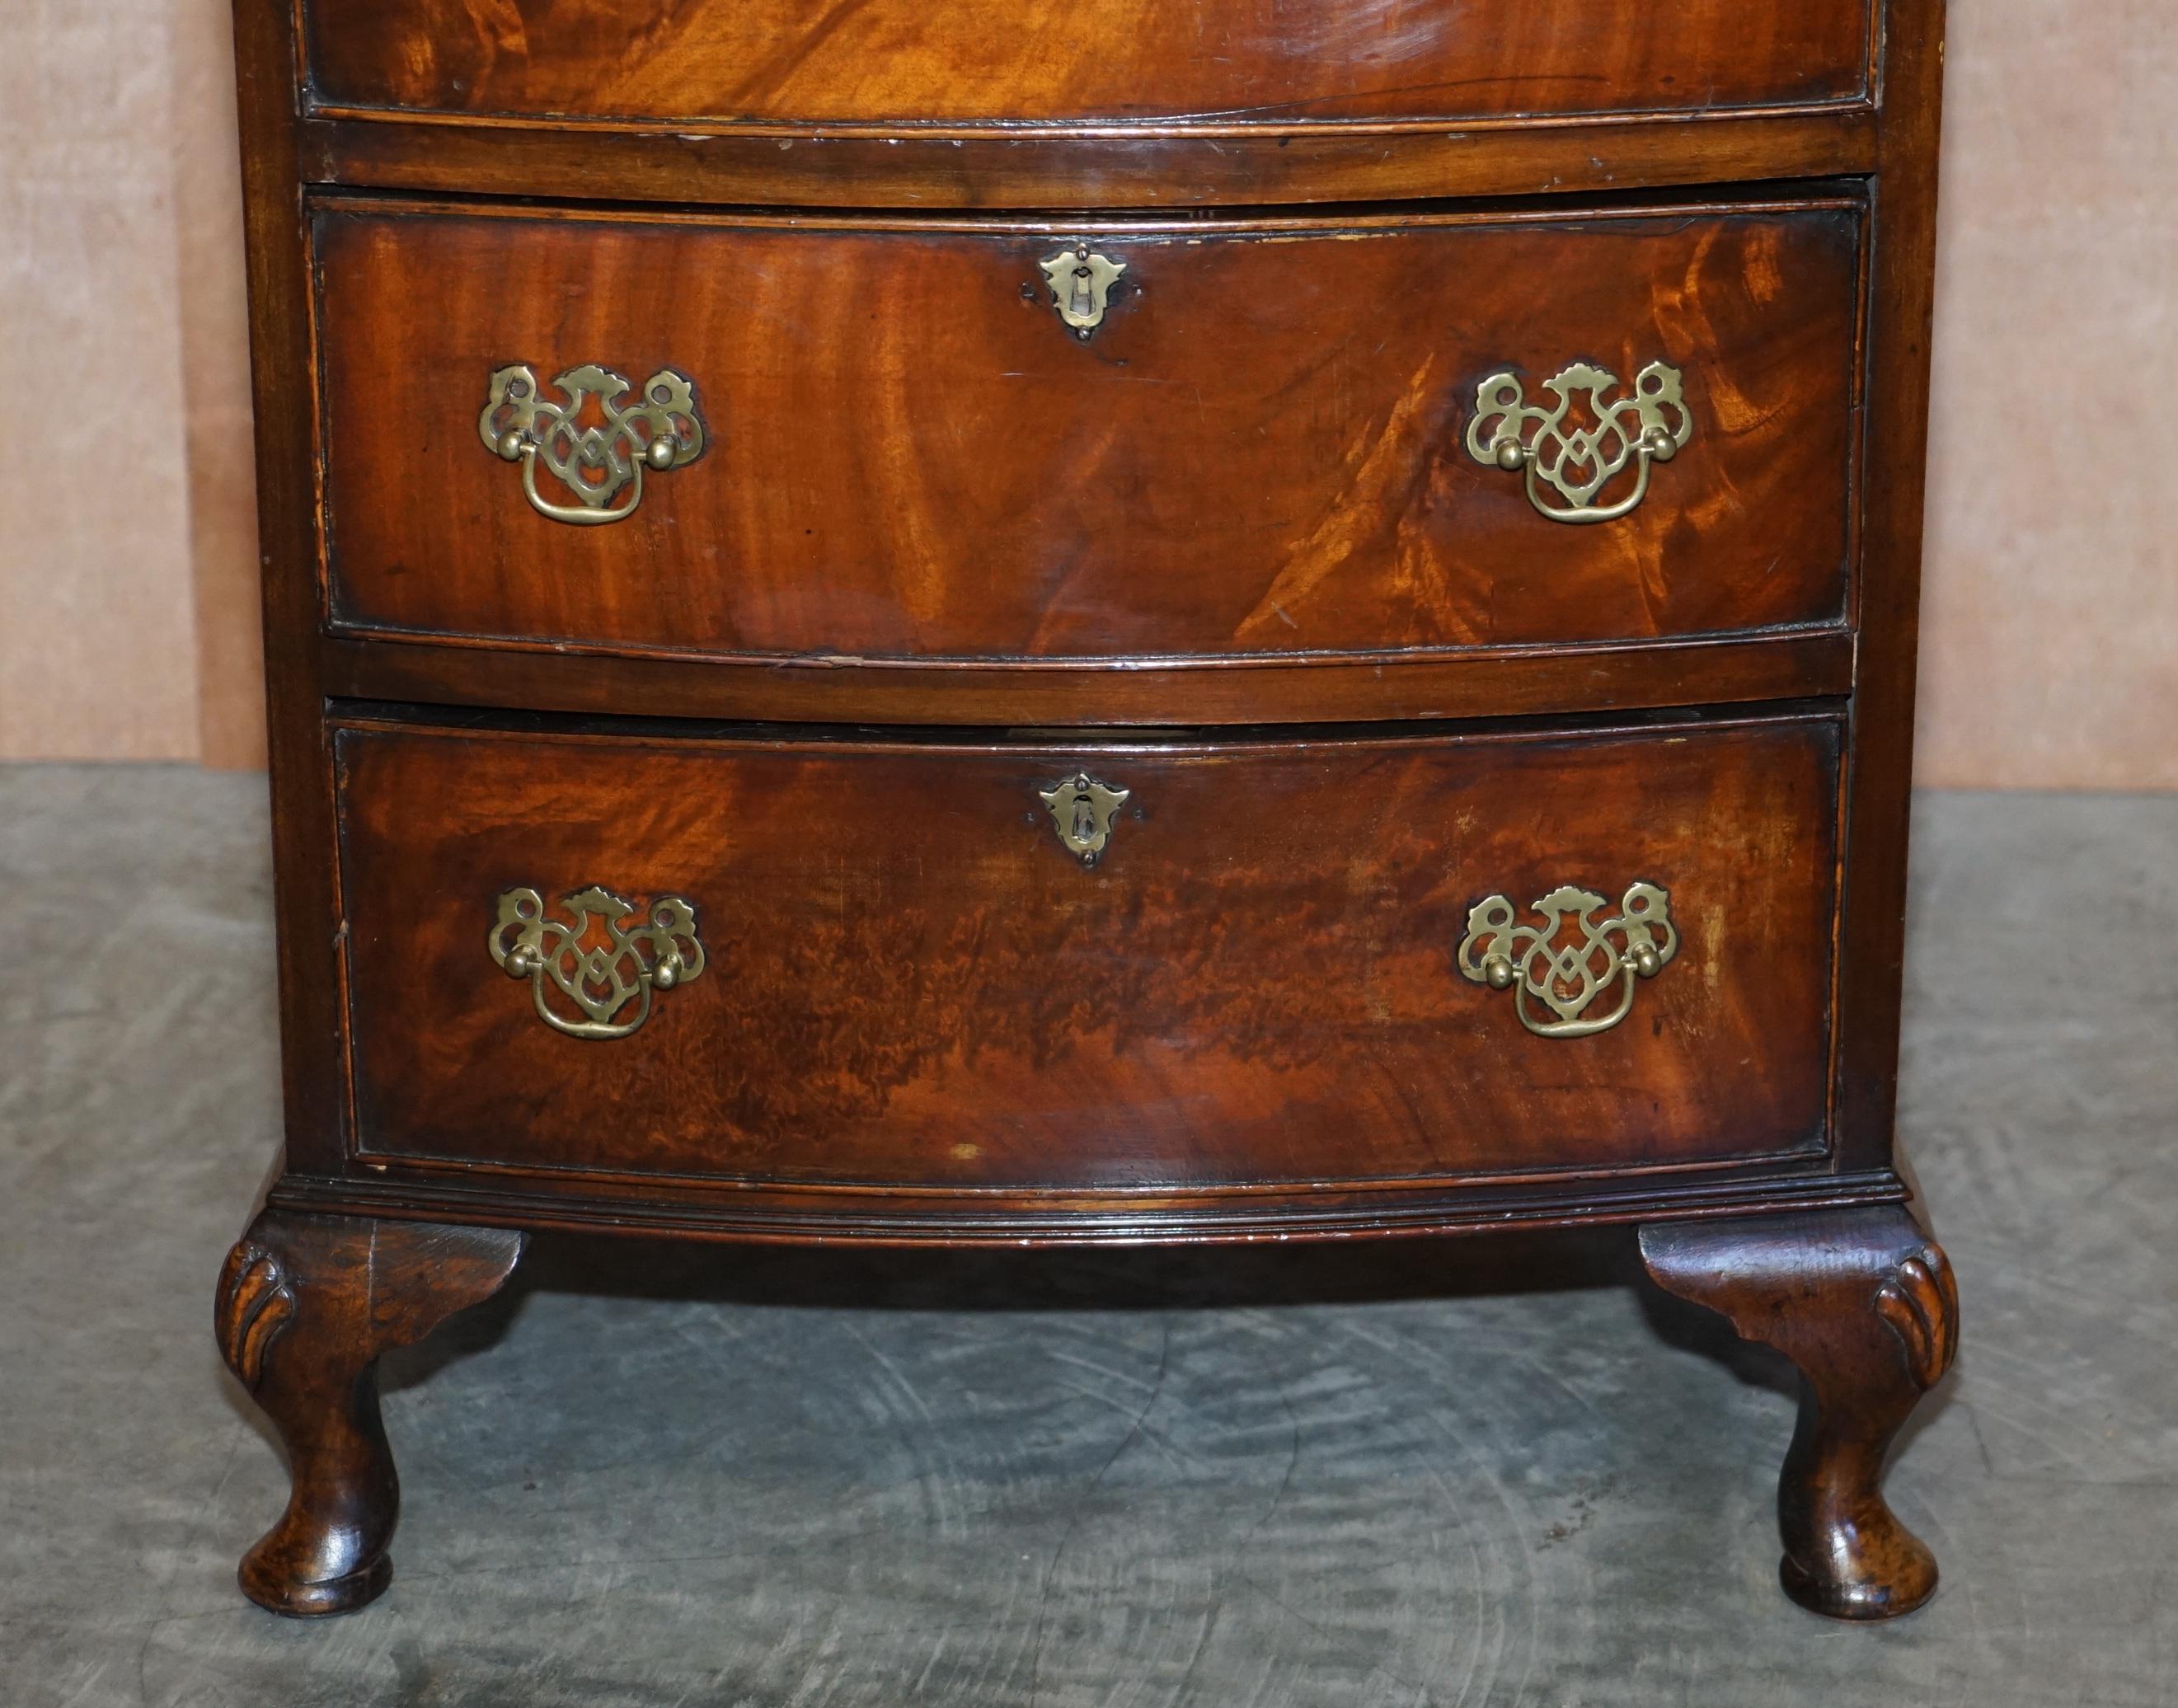 20th Century Large Side Table Sized Bow Fronted Chest of Drawers Made in the Georgian Manner